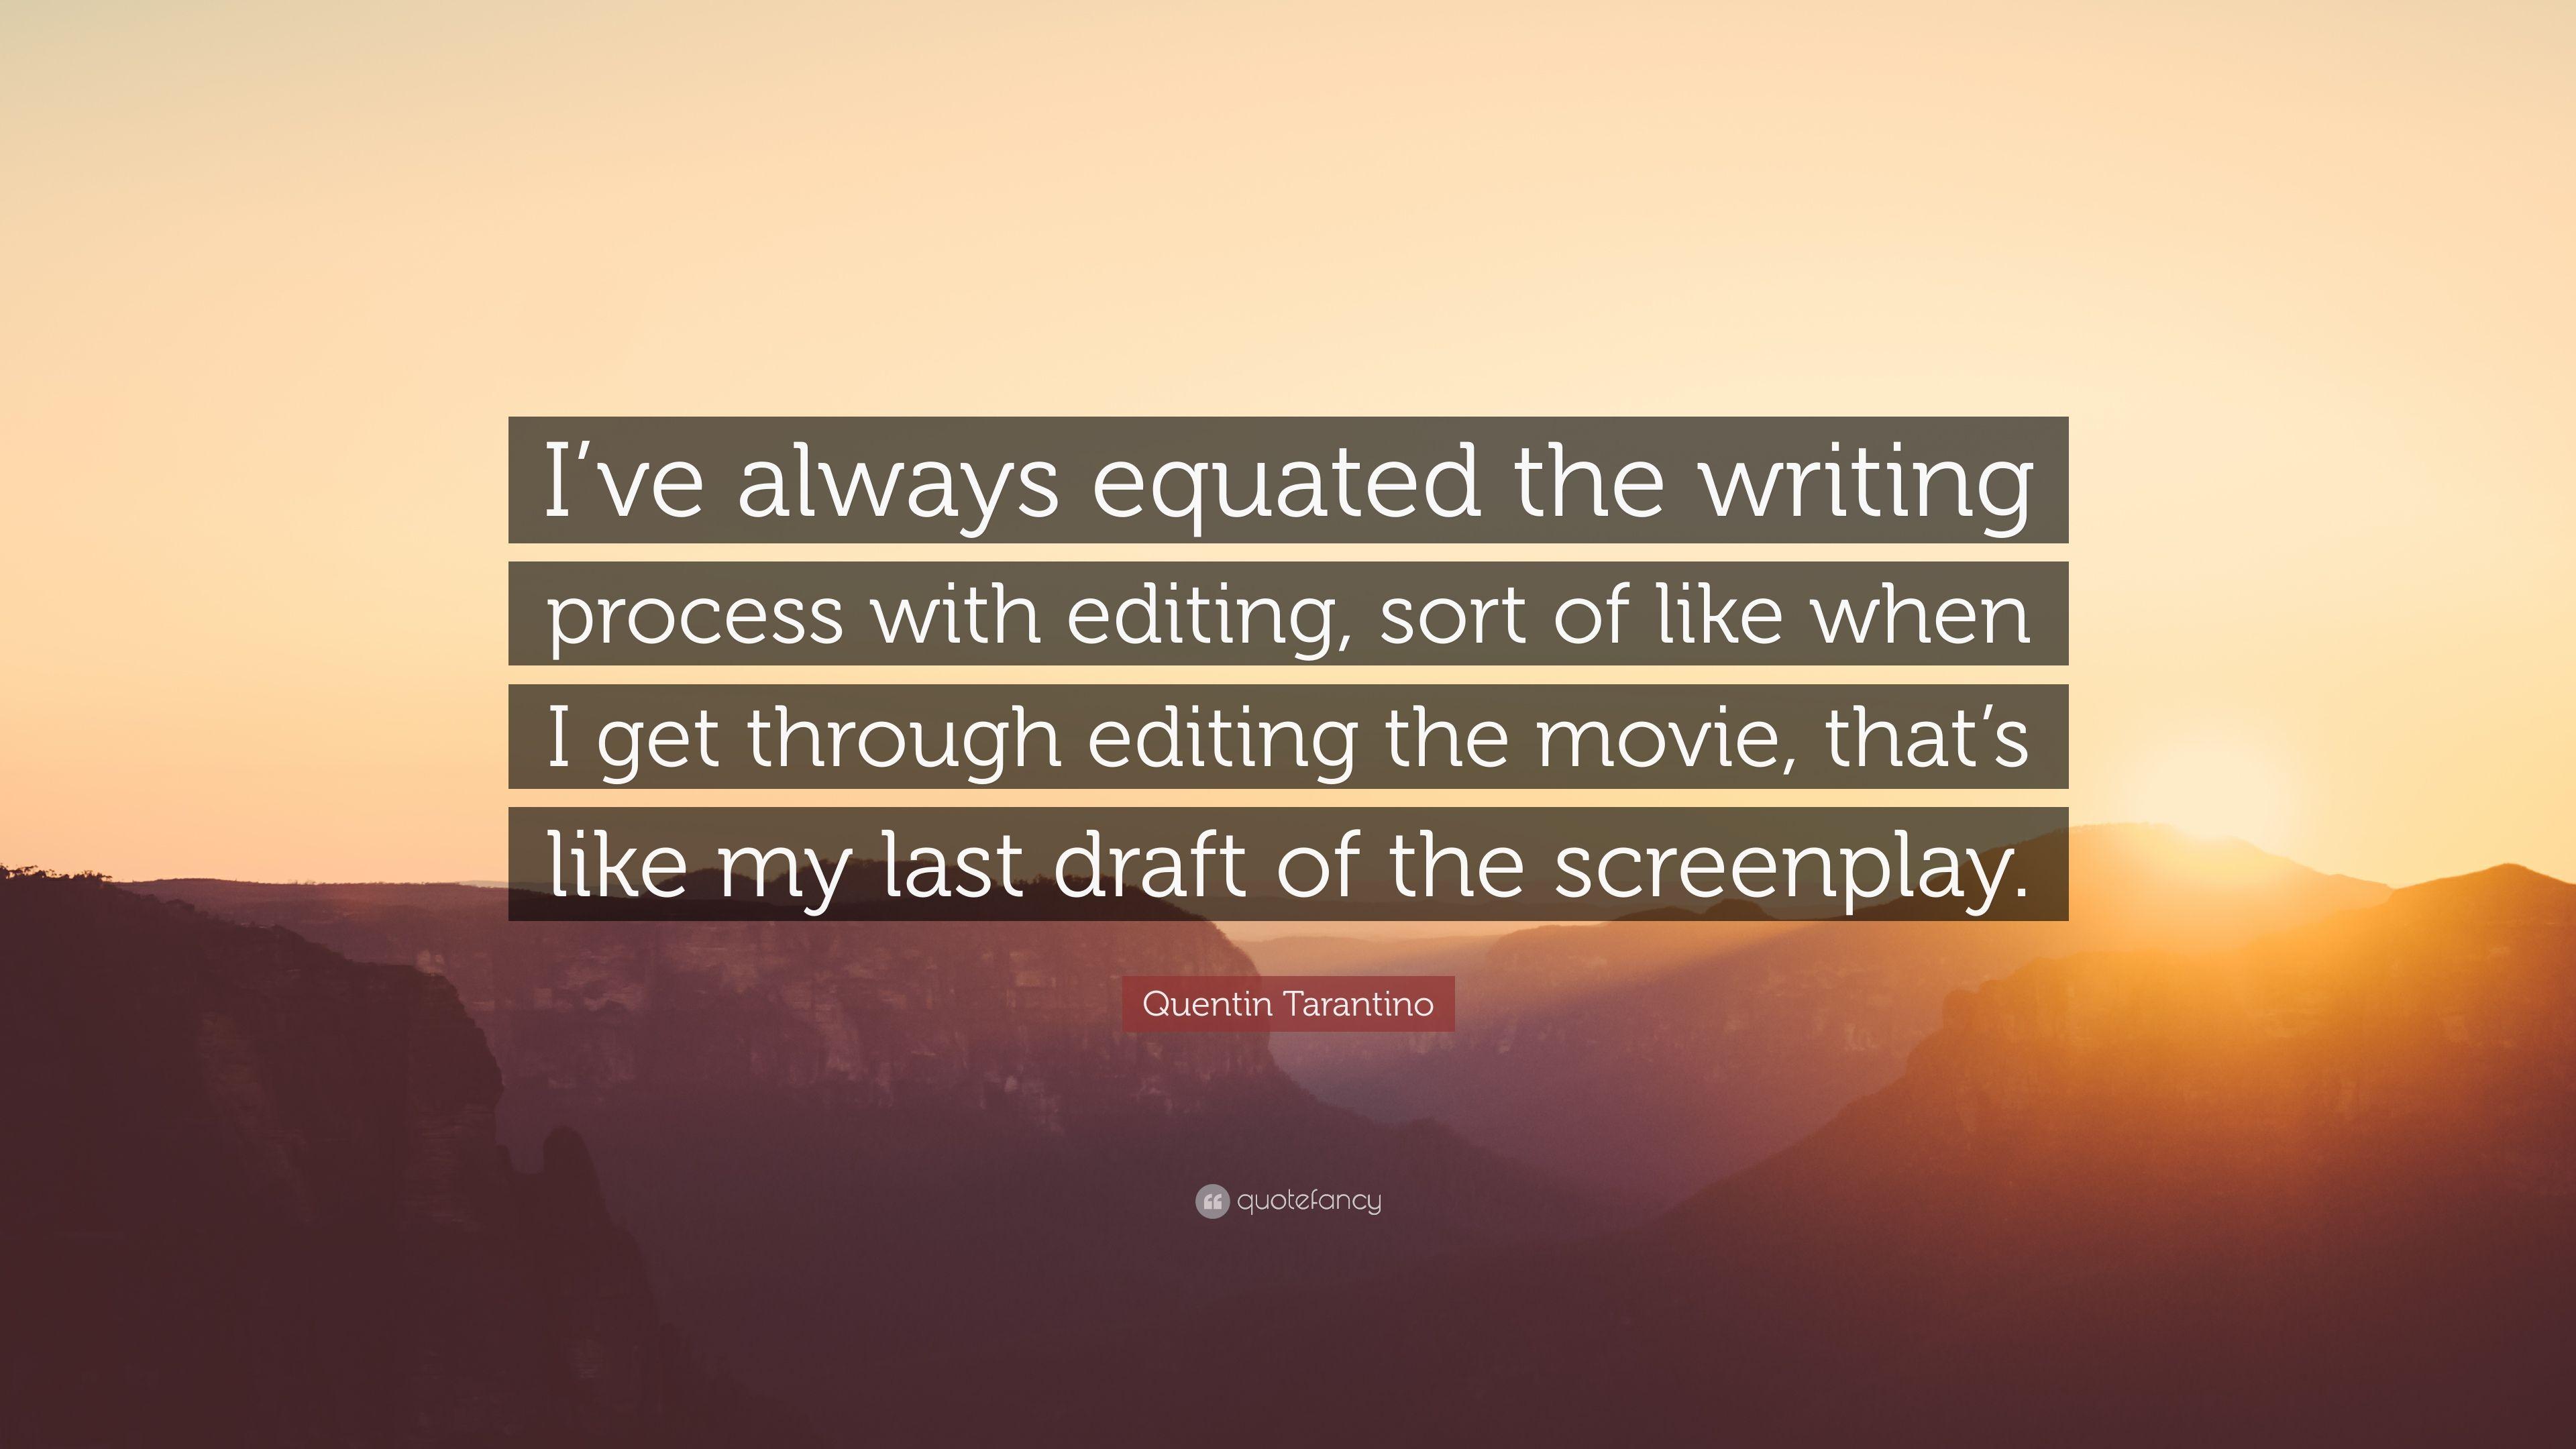 Quentin Tarantino Quote: “I've always equated the writing process